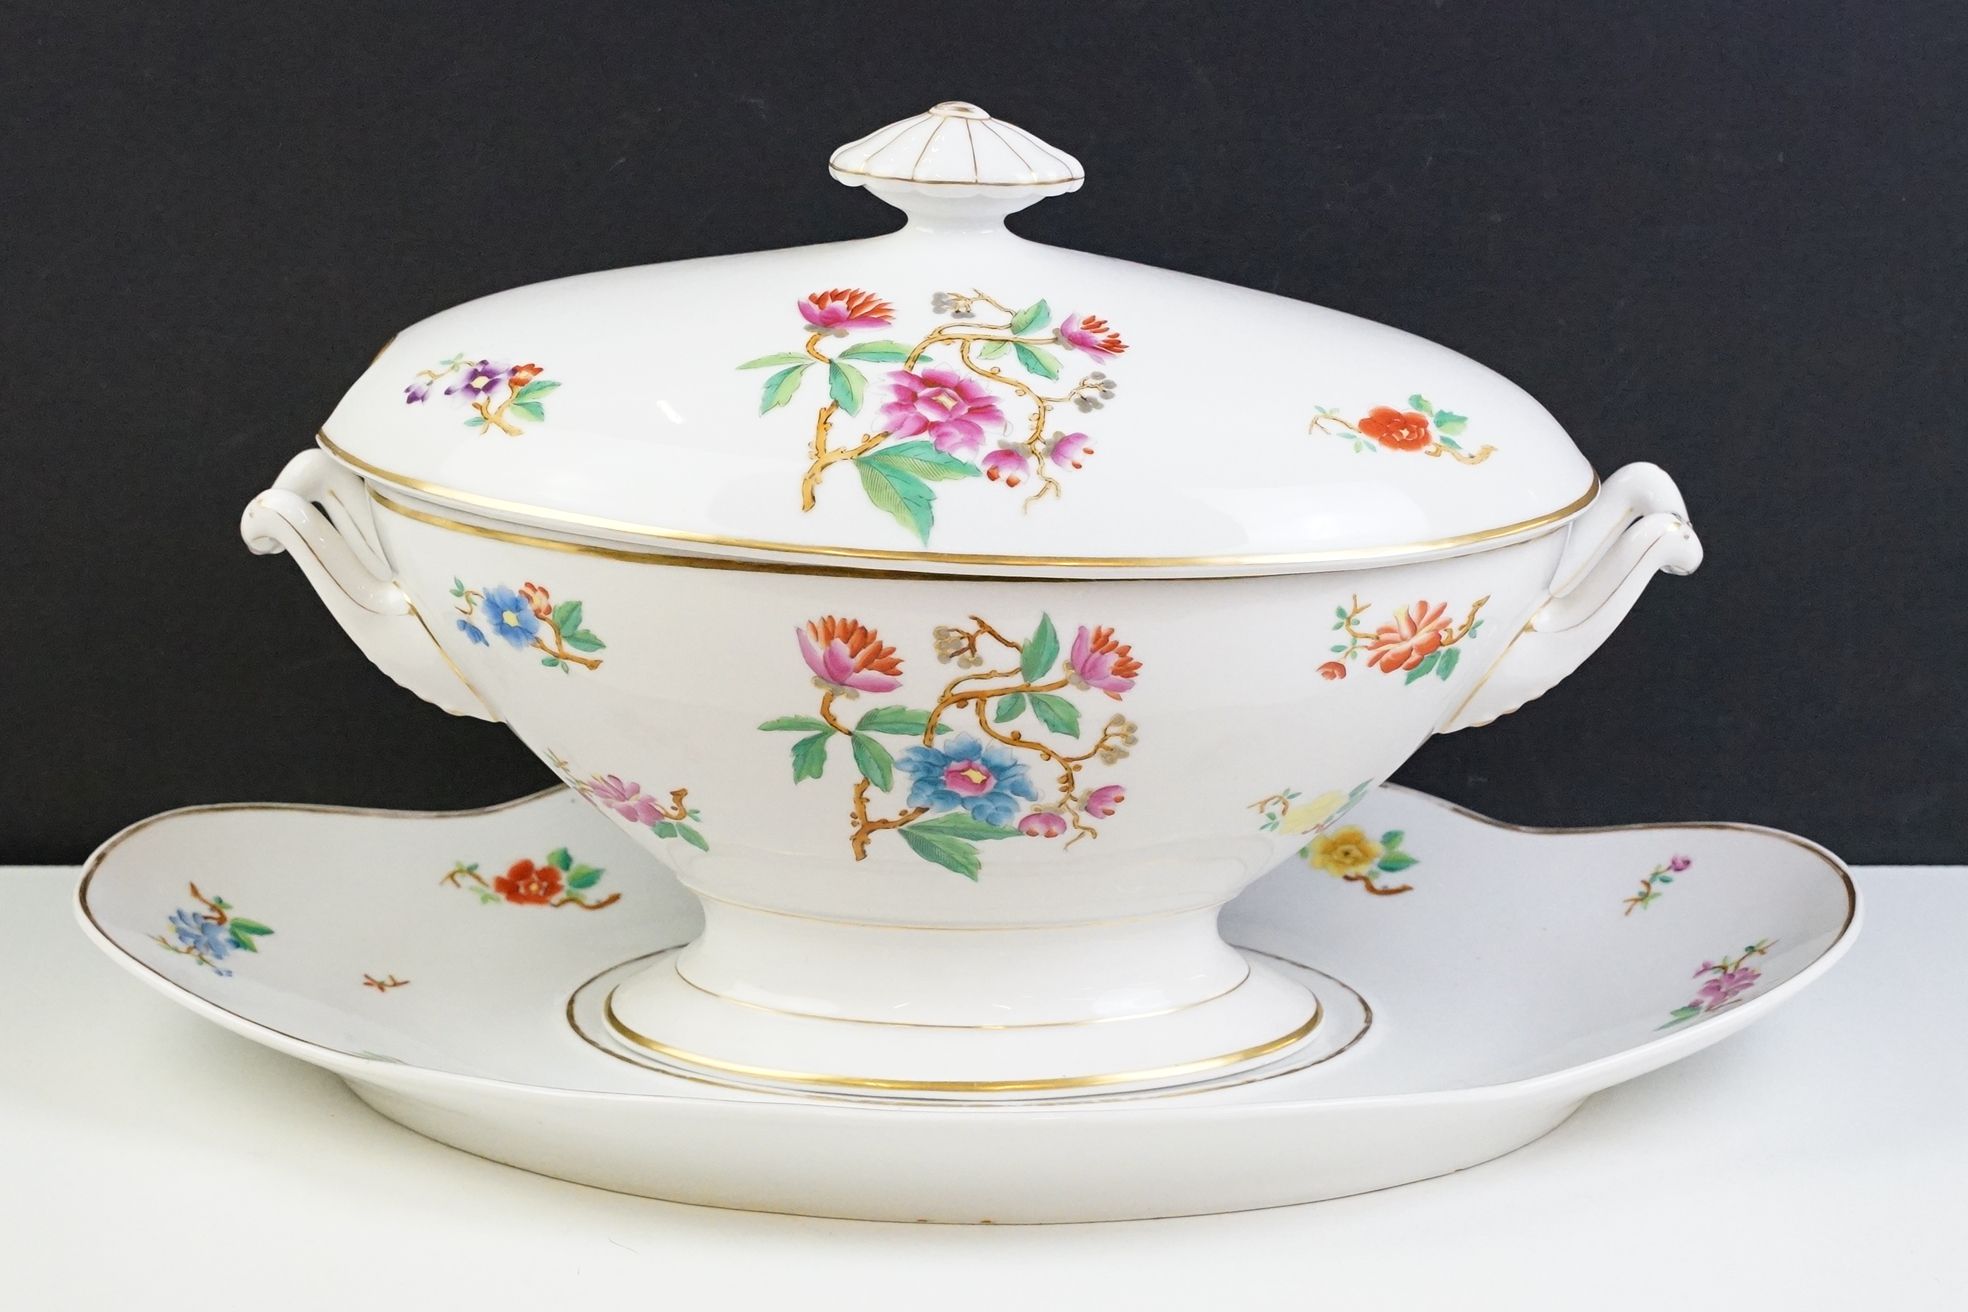 19th Century white ceramic large footed serving tureen with hand coloured floral decoration - Image 2 of 9